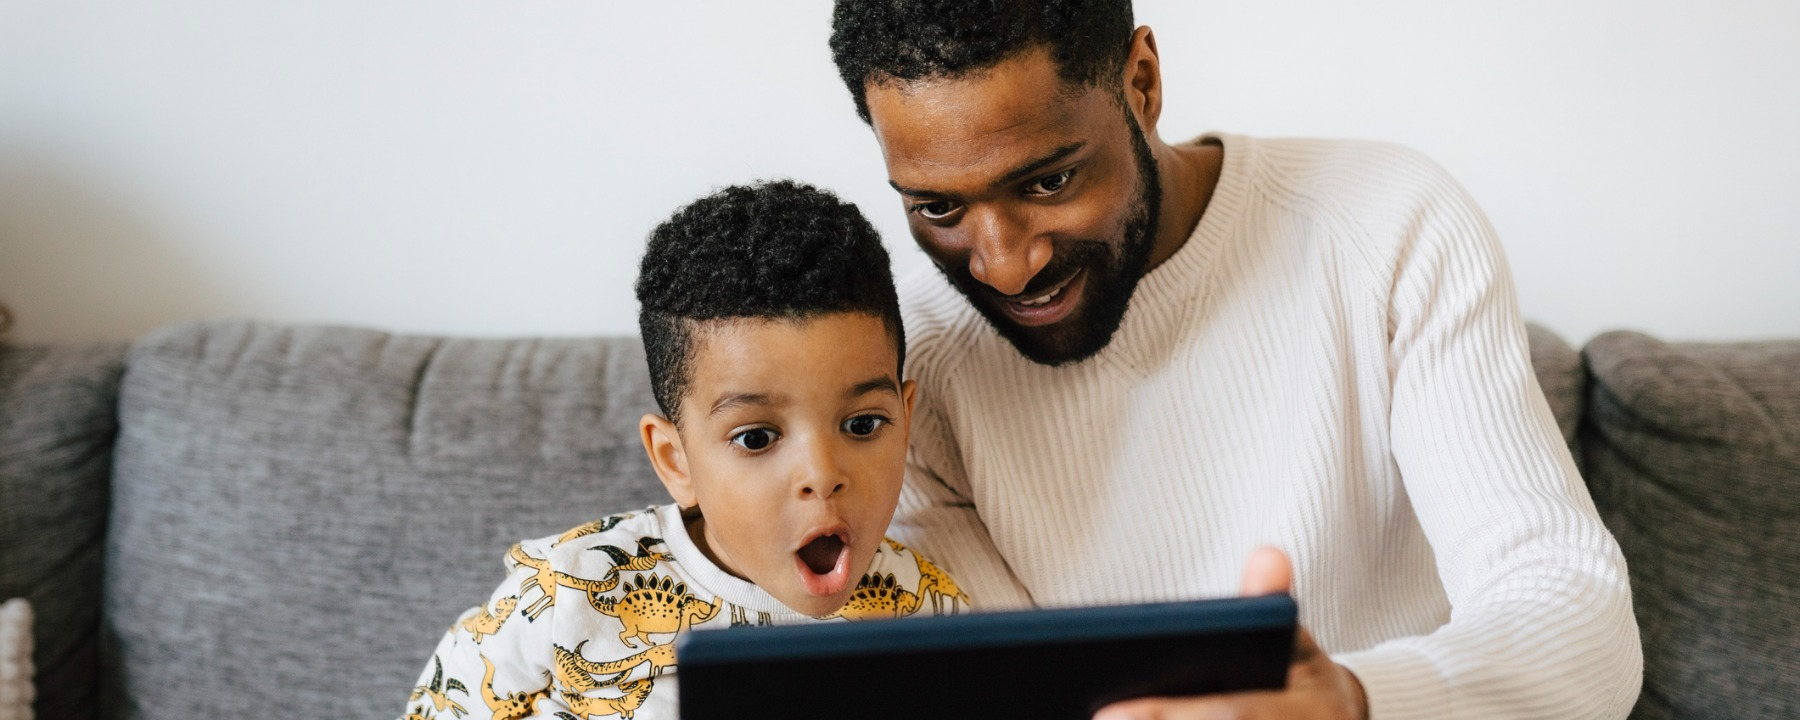 Technology -young boy looking at tablet with dad-1800*720